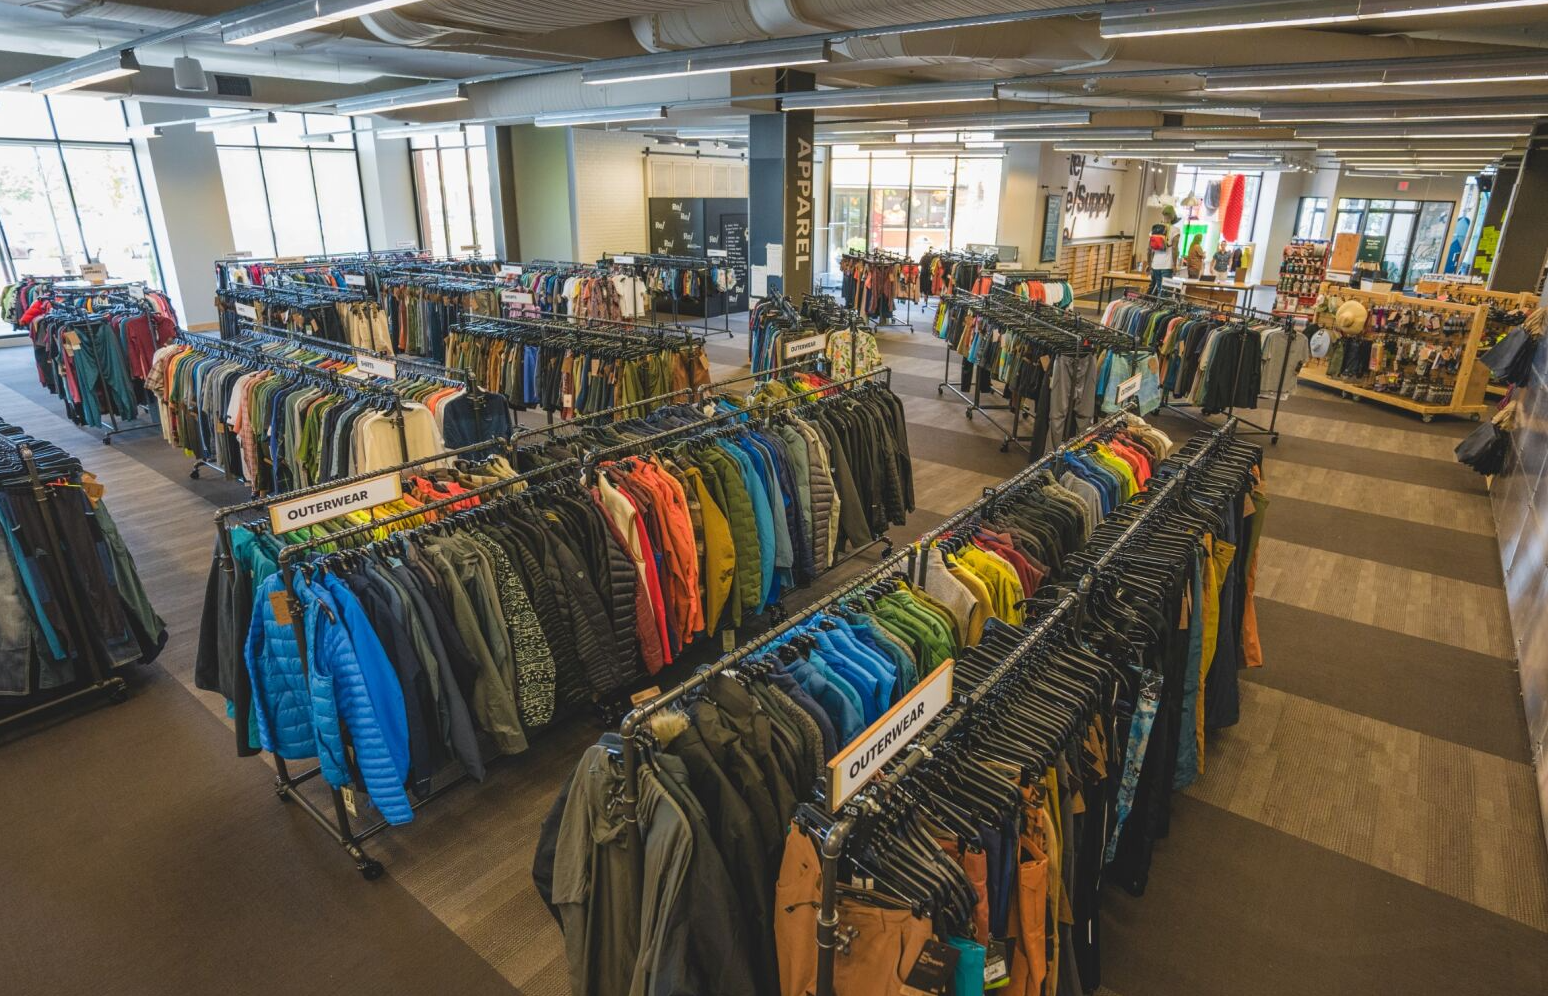 Shop Cheap Outdoor Gear at These Top Retailers: REI Outlet, Steep